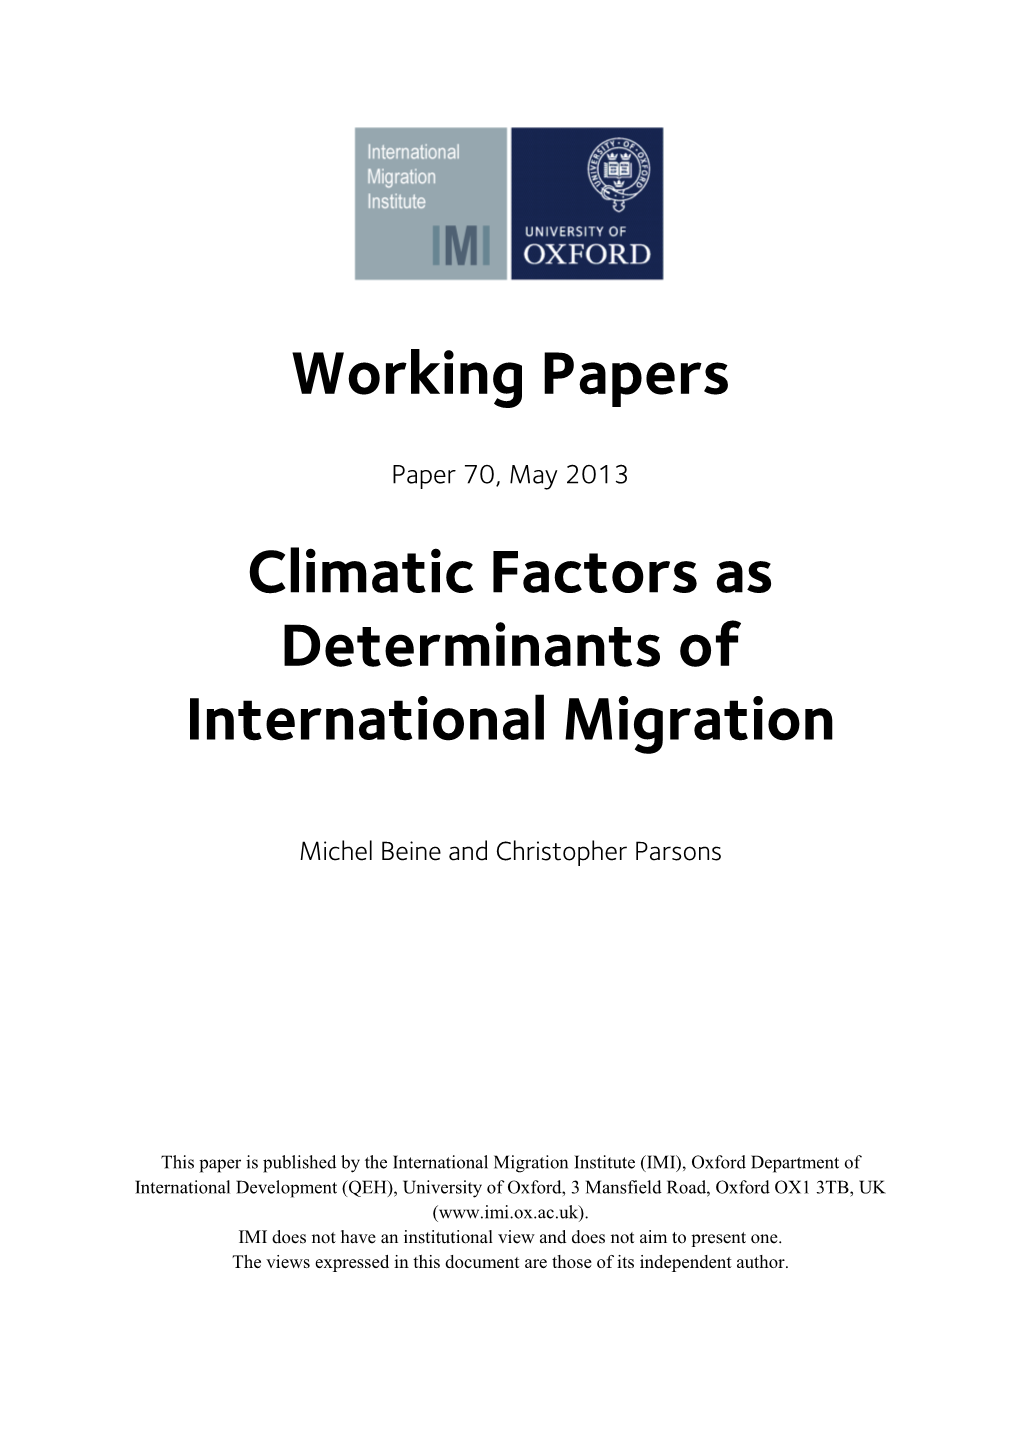 Working Papers Climatic Factors As Determinants of International Migration